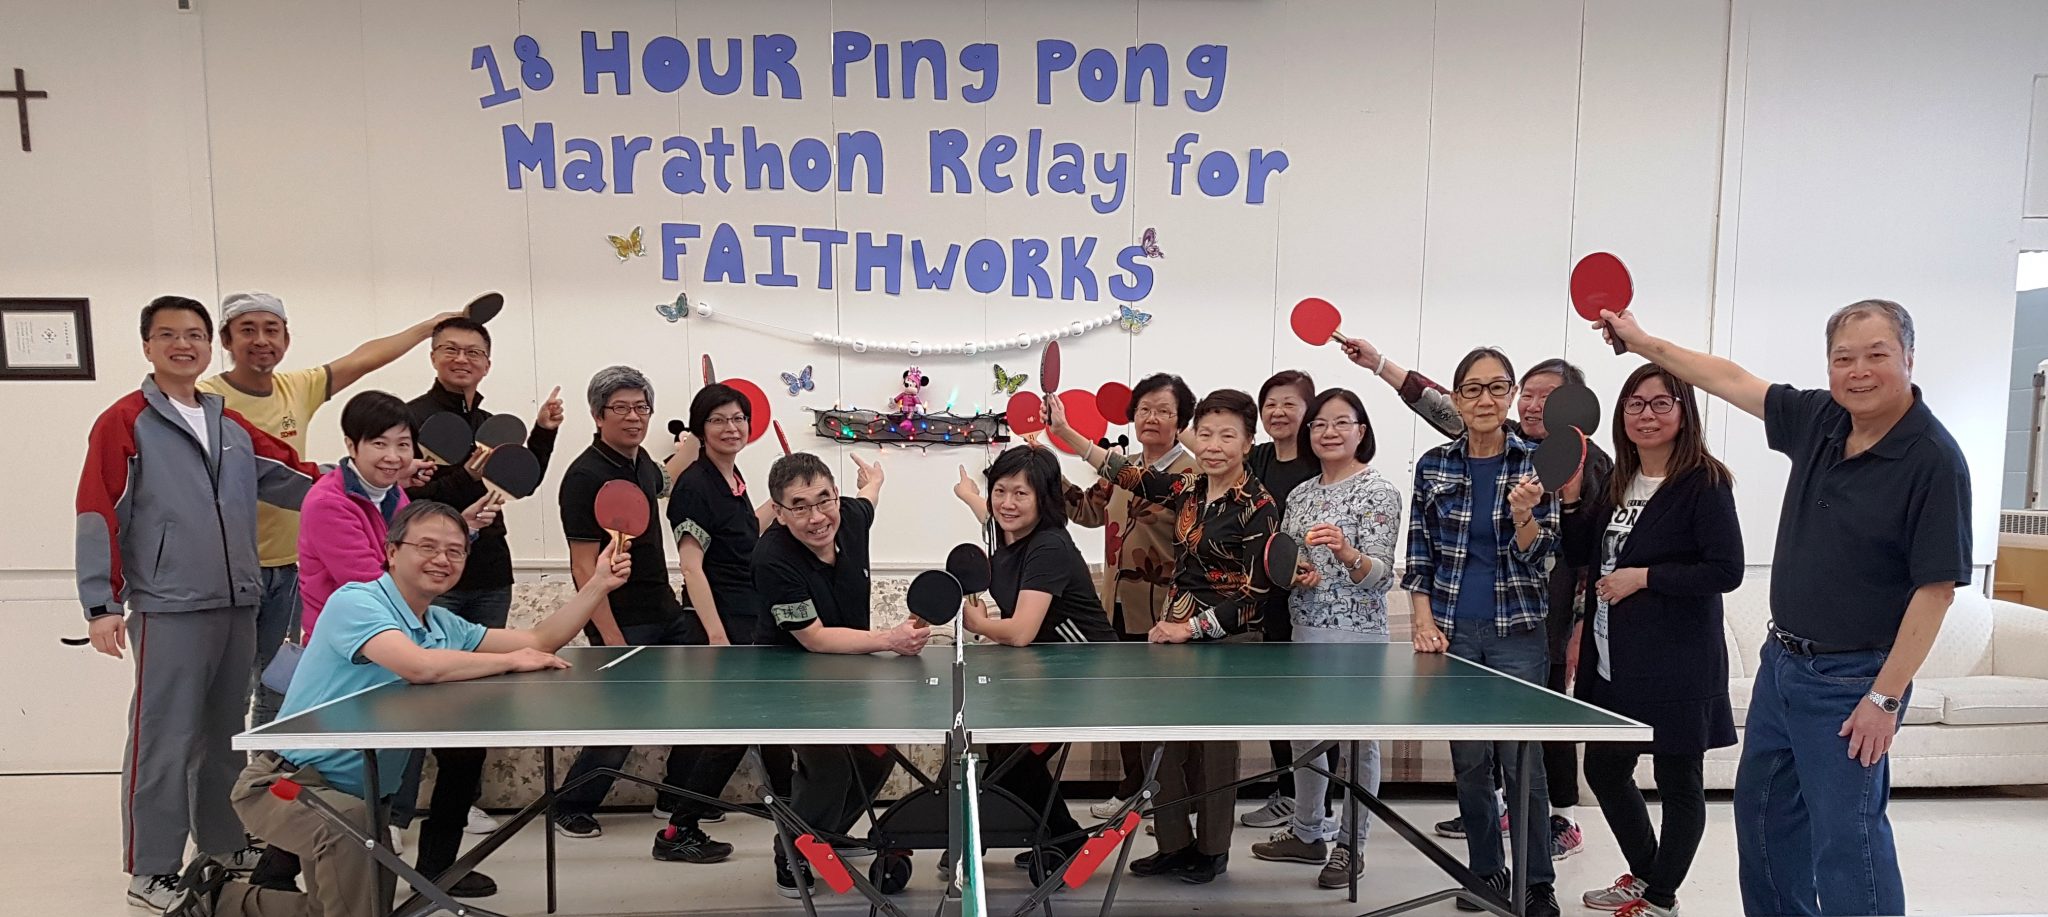 How One Church turned Ping Pong into Mission